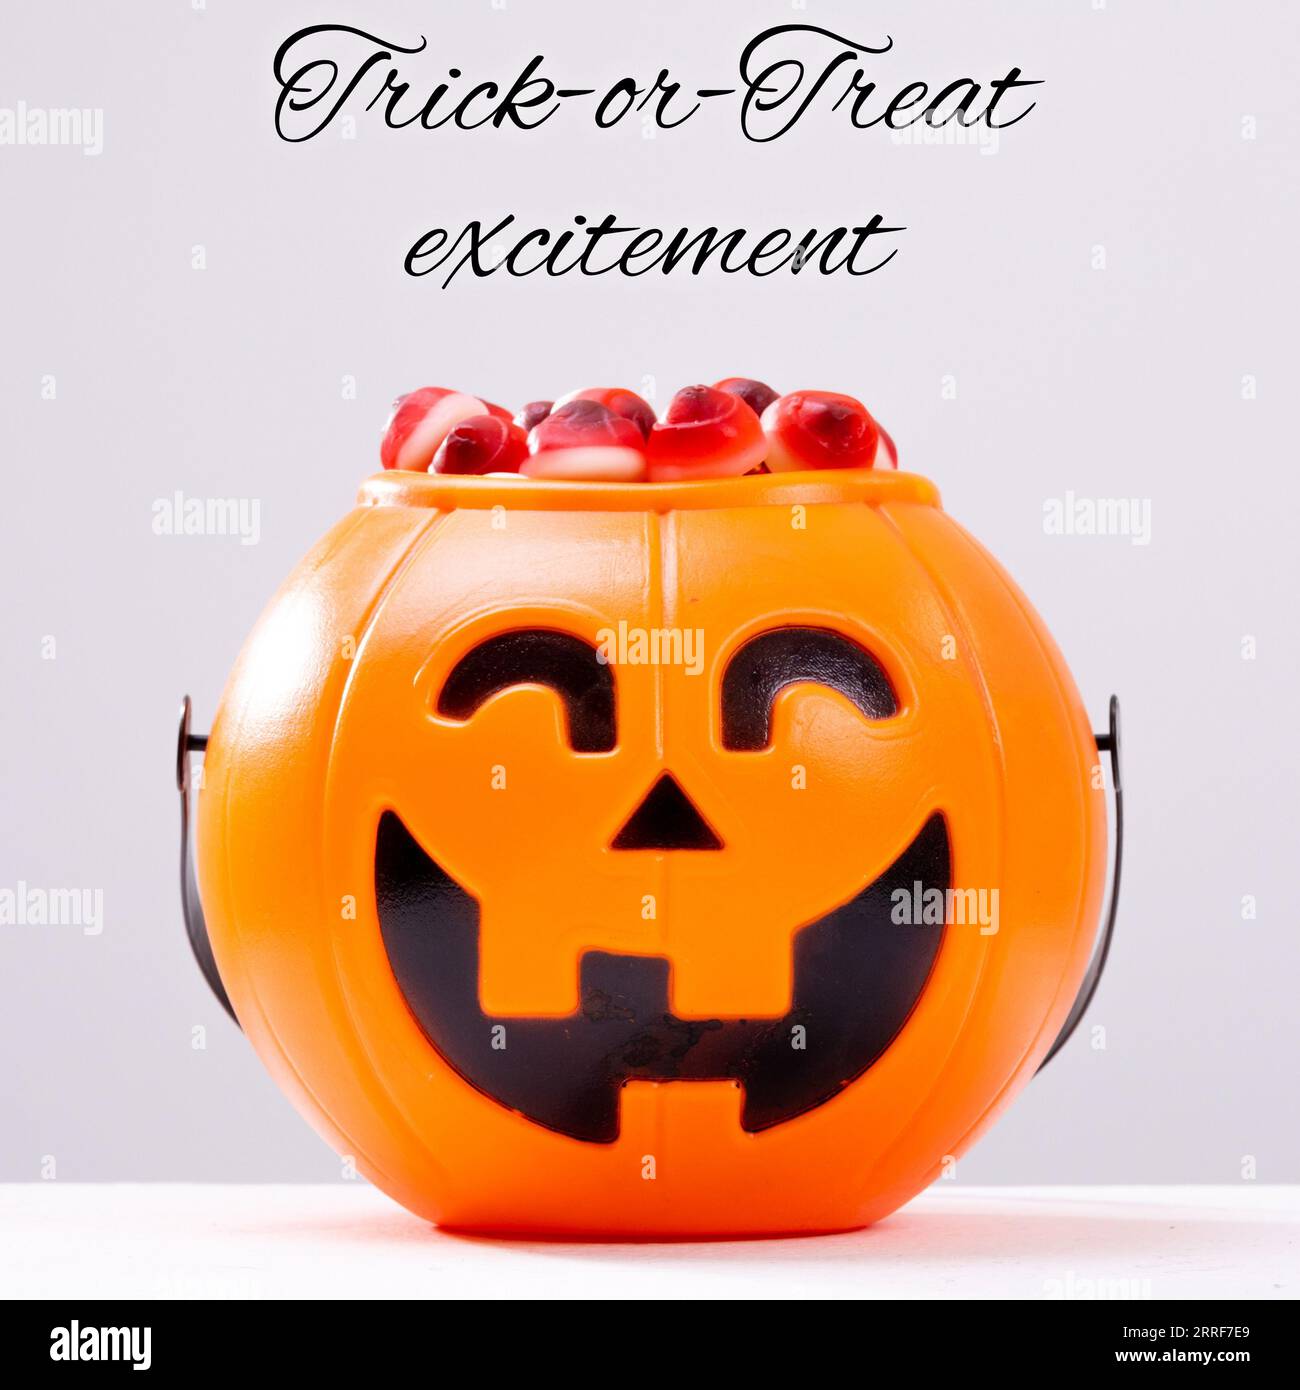 Composite of trick or treat excitement text and halloween pumpkin on white background Stock Photo